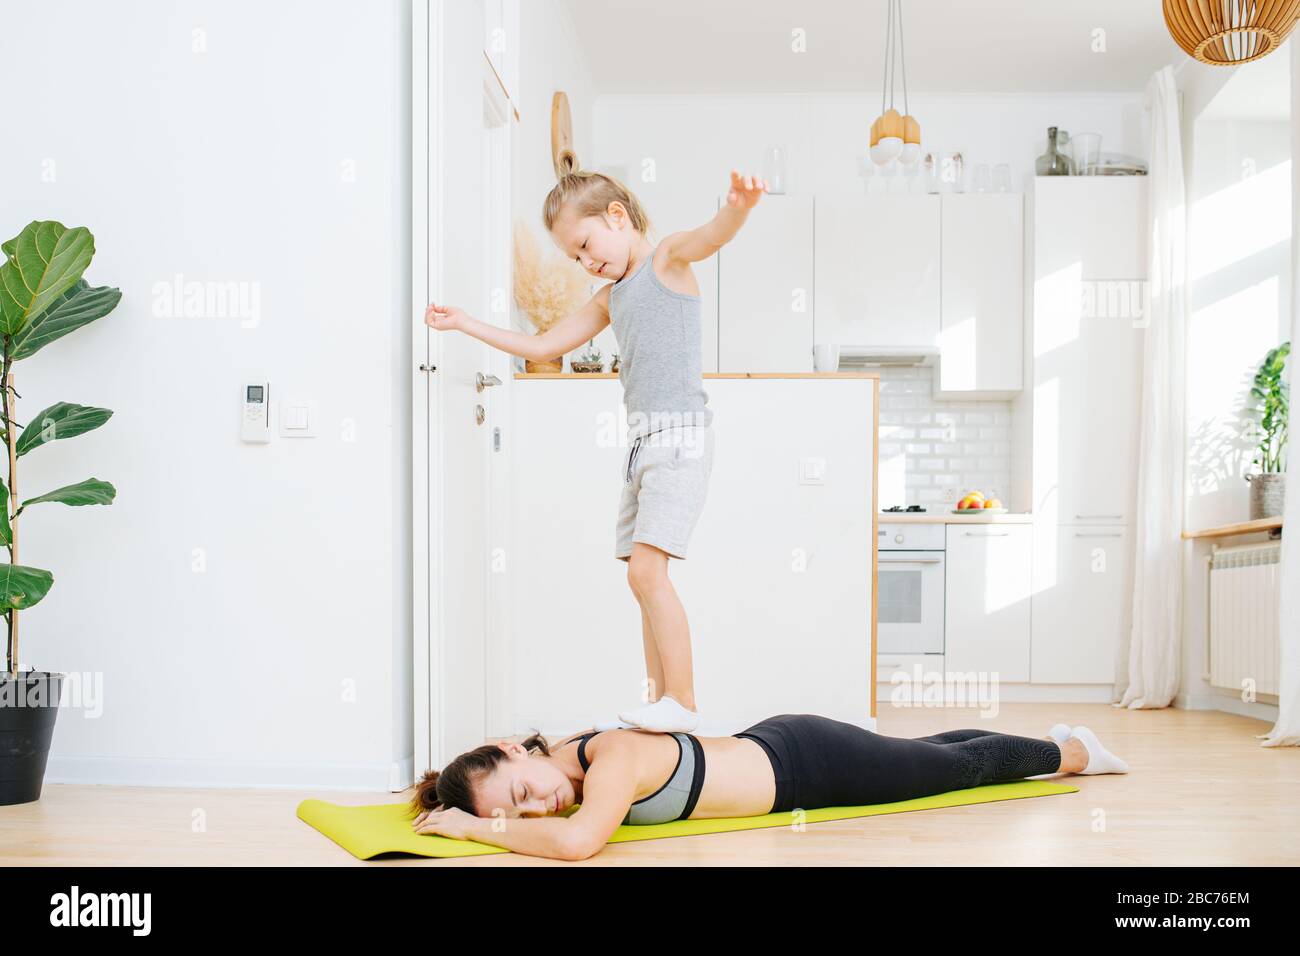 Son walking on mom's back after yoga as pressure massage Stock Photo